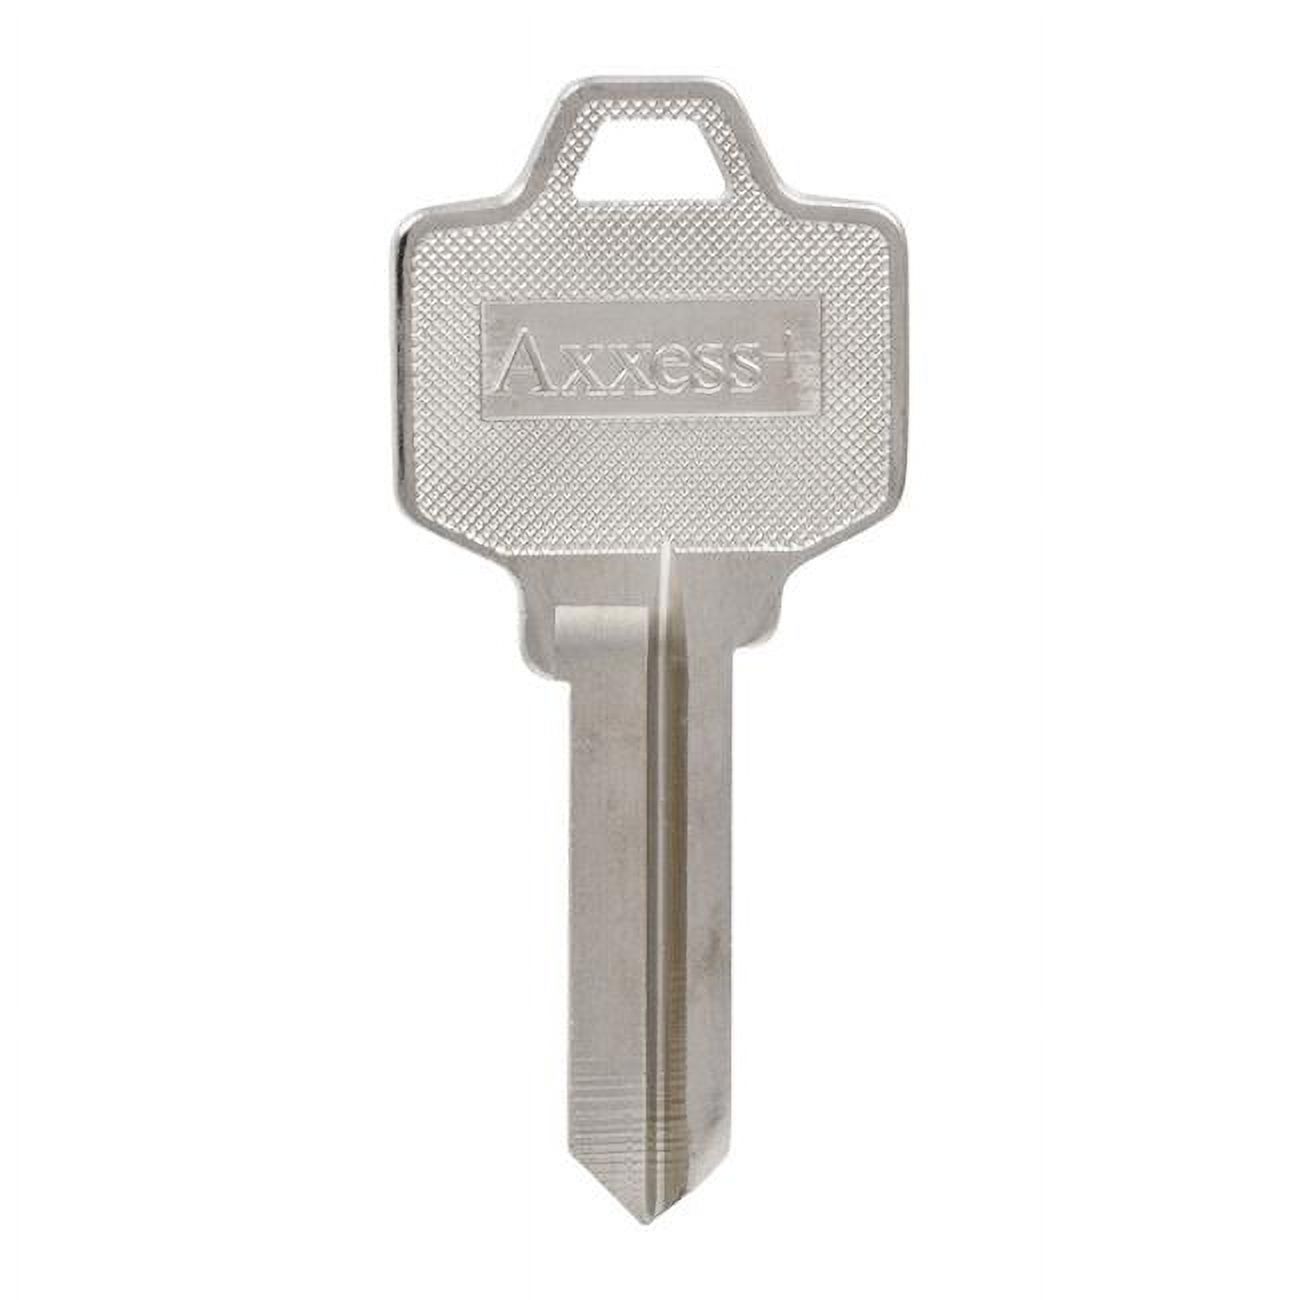 House of Office 74-Single Sided Universal Key Blank, Assorted - Pack of 4 - image 1 of 1